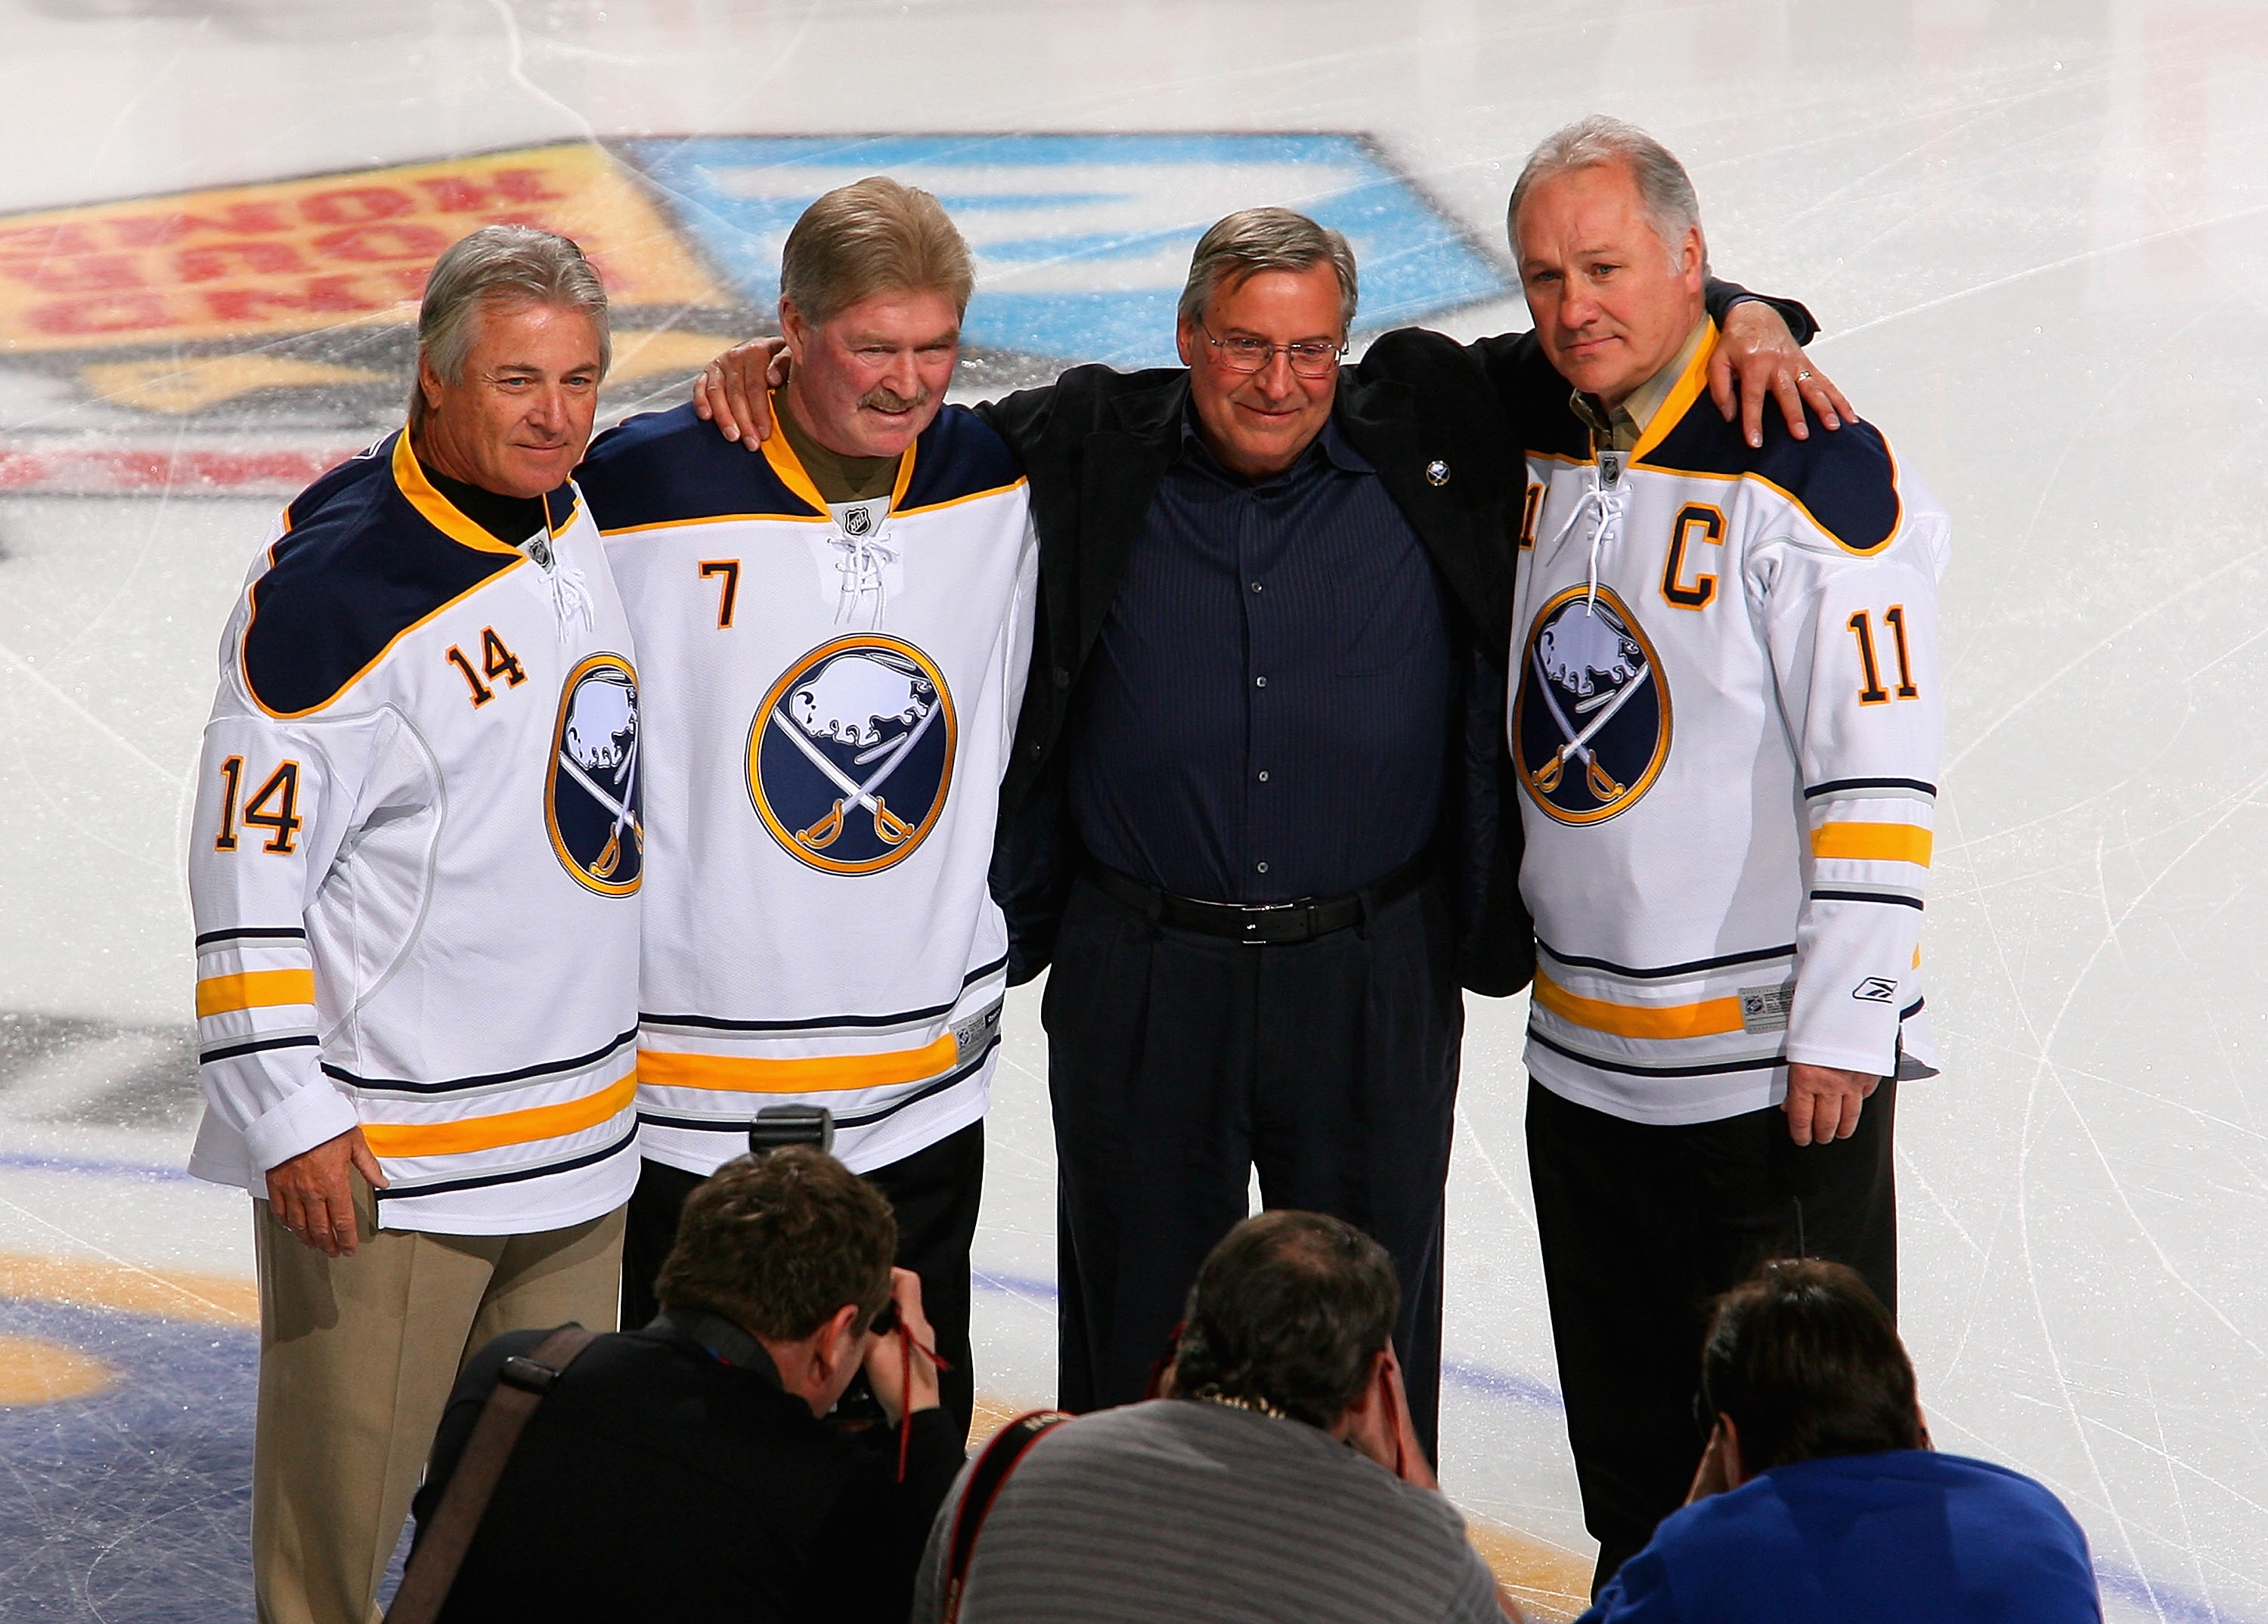 BUFFALO, NY - FEBRUARY 23:  New Buffalo Sabres owner Terry Pegula stands with former Sabres palyers Rene Robert #14, Rick Martin #7 and Gilbert Perrault #11  during pre game ceremonies prior to play against the Atlanta Thrashers at HSBC Arena on February